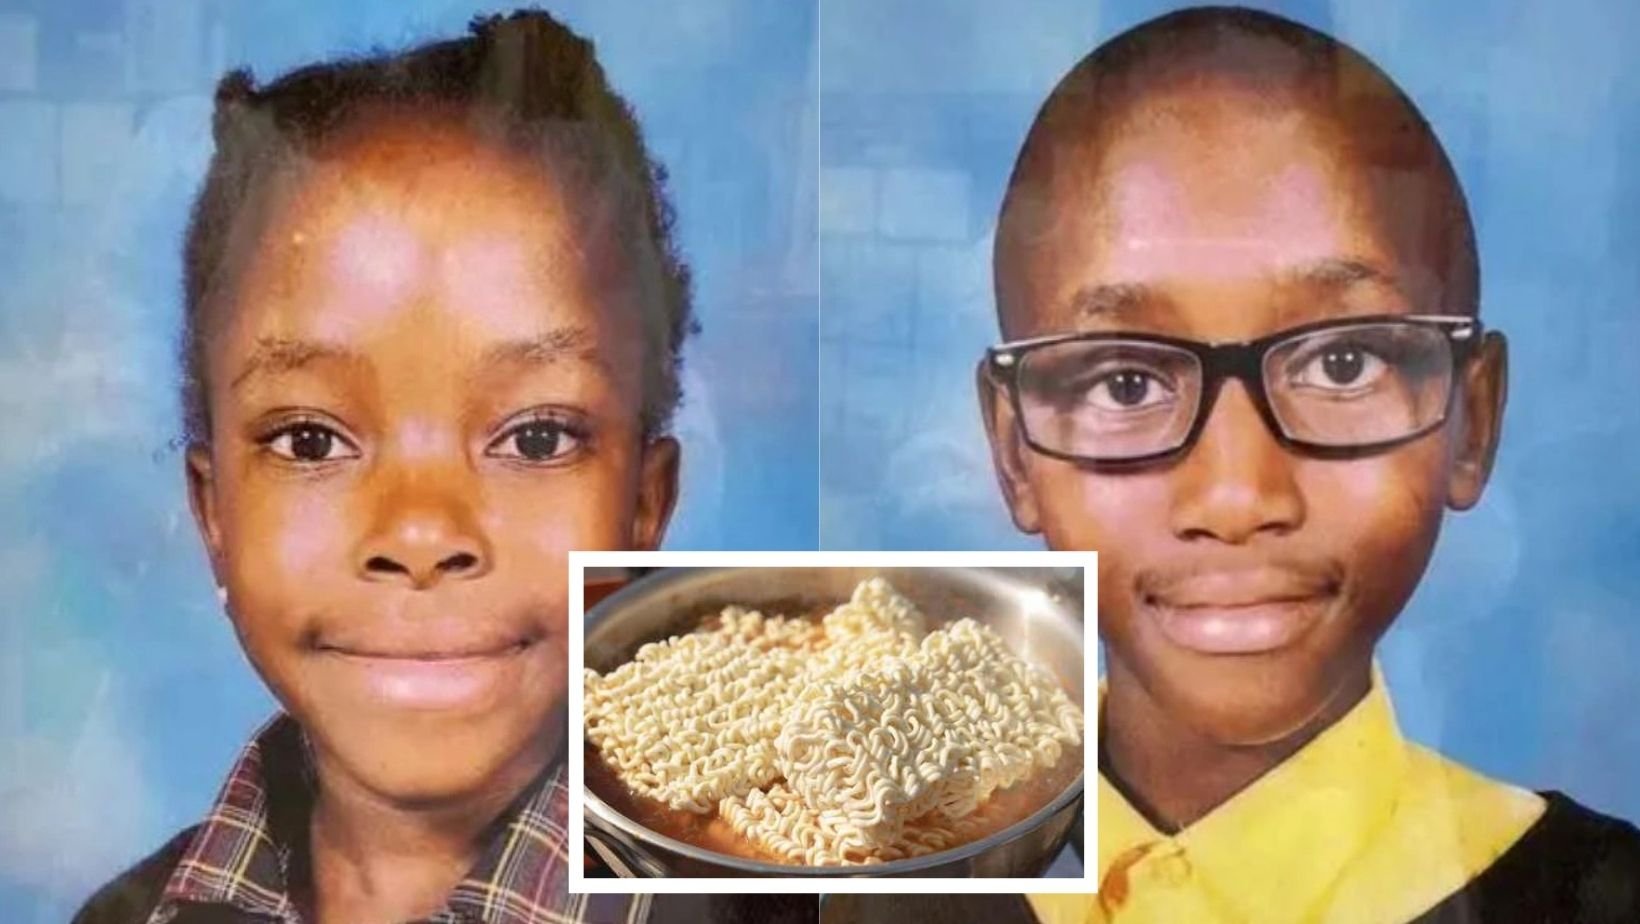 1 68.jpg?resize=1200,630 - Family Is Left Devastated When Five Kids Died After Eating INSTANT NOODLES, Urging Other Parents To Not Feed Noodle Packets To Children